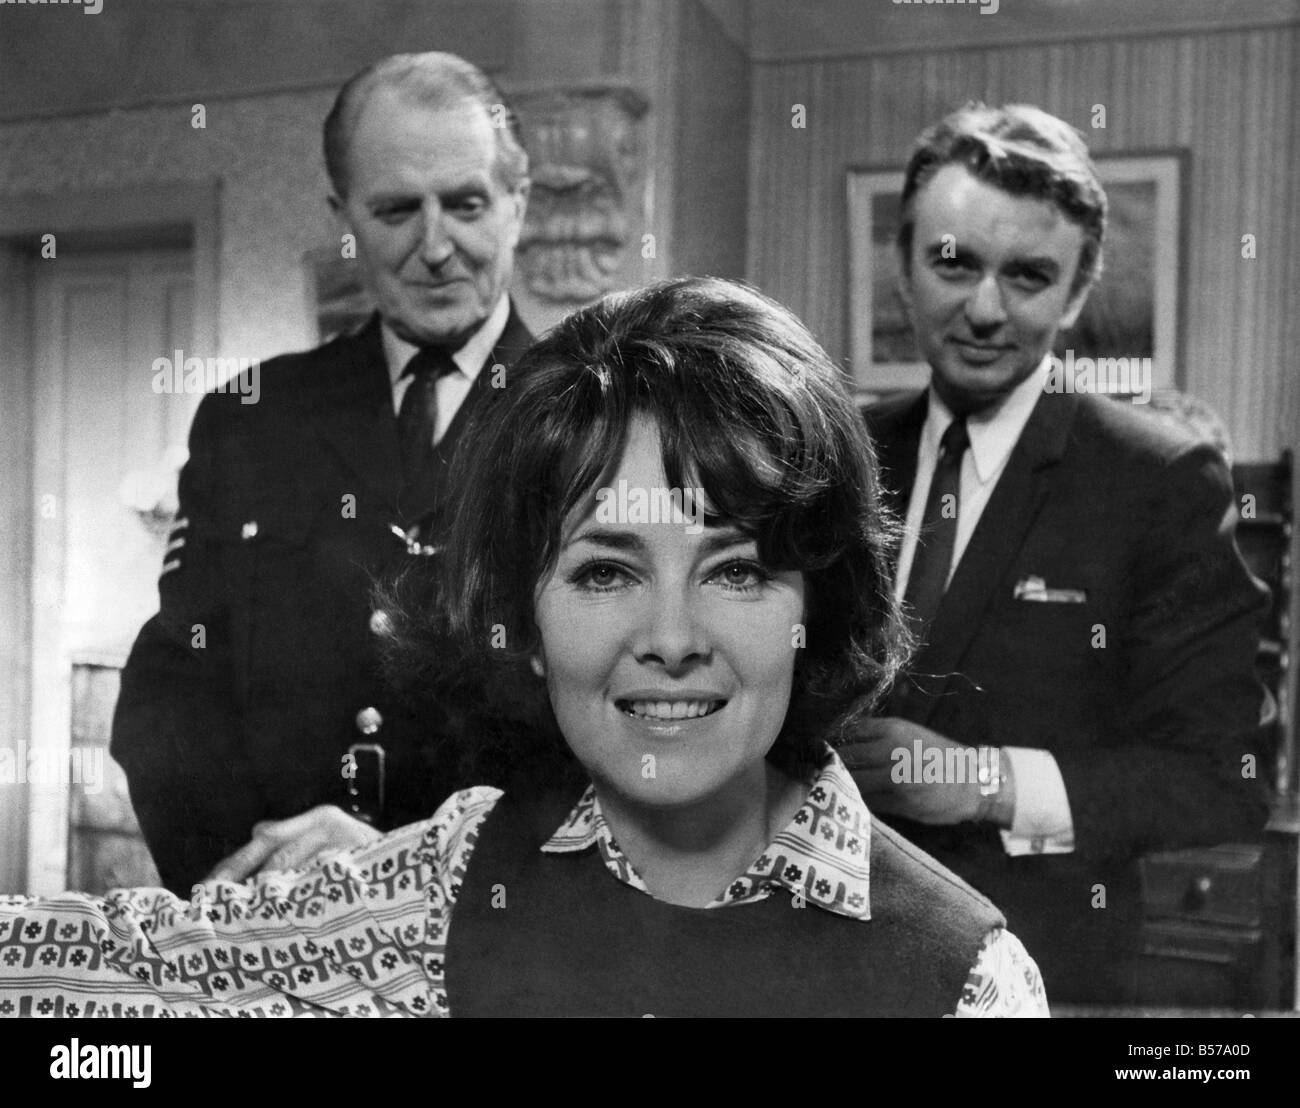 The famous Dixon of Dock Green Trio back on your screens soon. Jack Warner as Dixon, Jeanette Hutchinson as Mary, and Peter Byrne as Andy Crawford. August 1969 P005292 Stock Photo